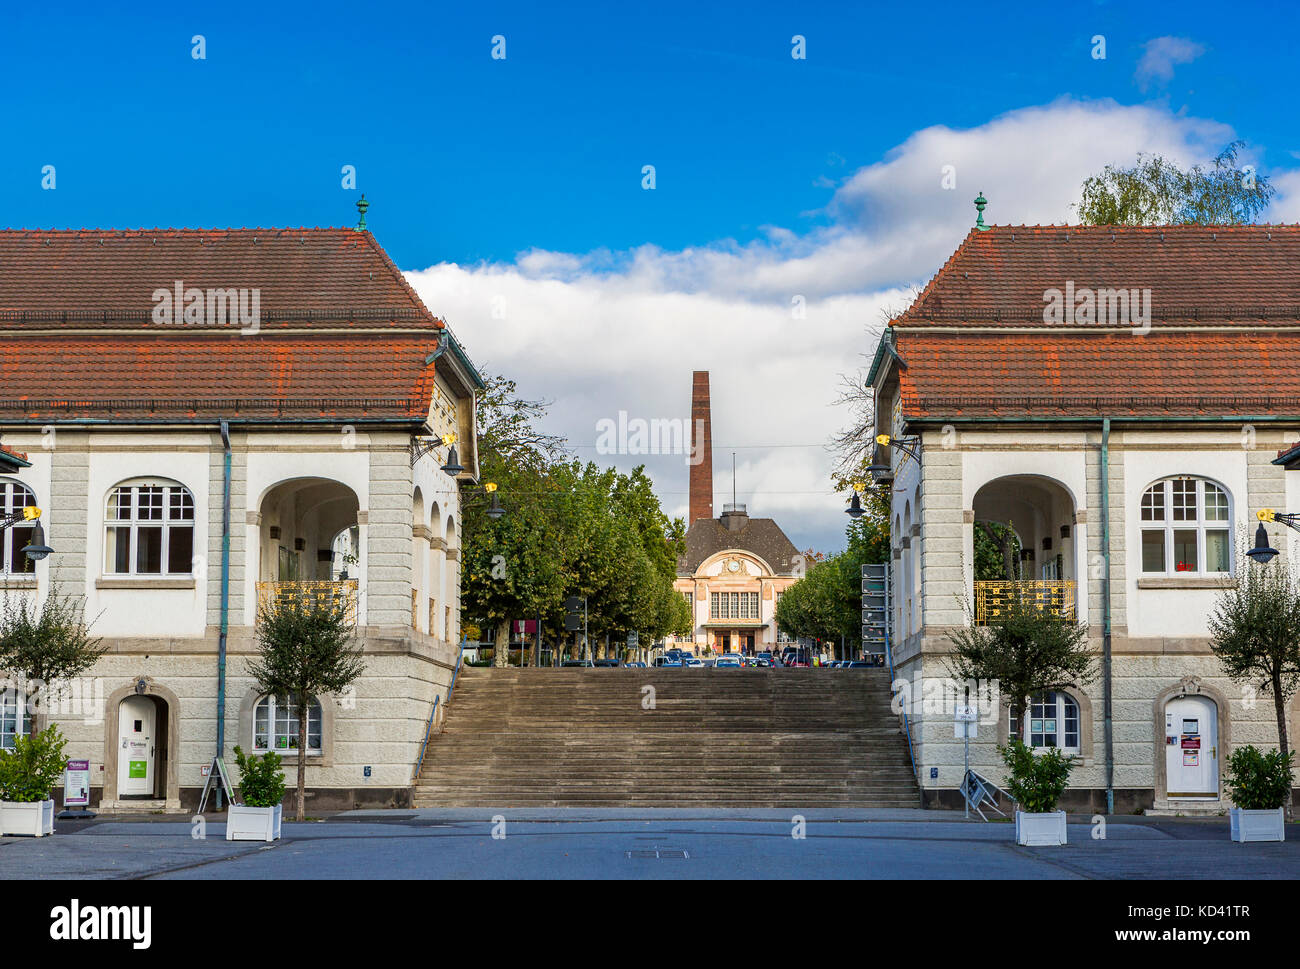 Sprudelhof Bad Nauheim, Germany. View from courtyard to railway station. The Sprudelhof is a former health resort founded in the Art Nouveau era. Stock Photo